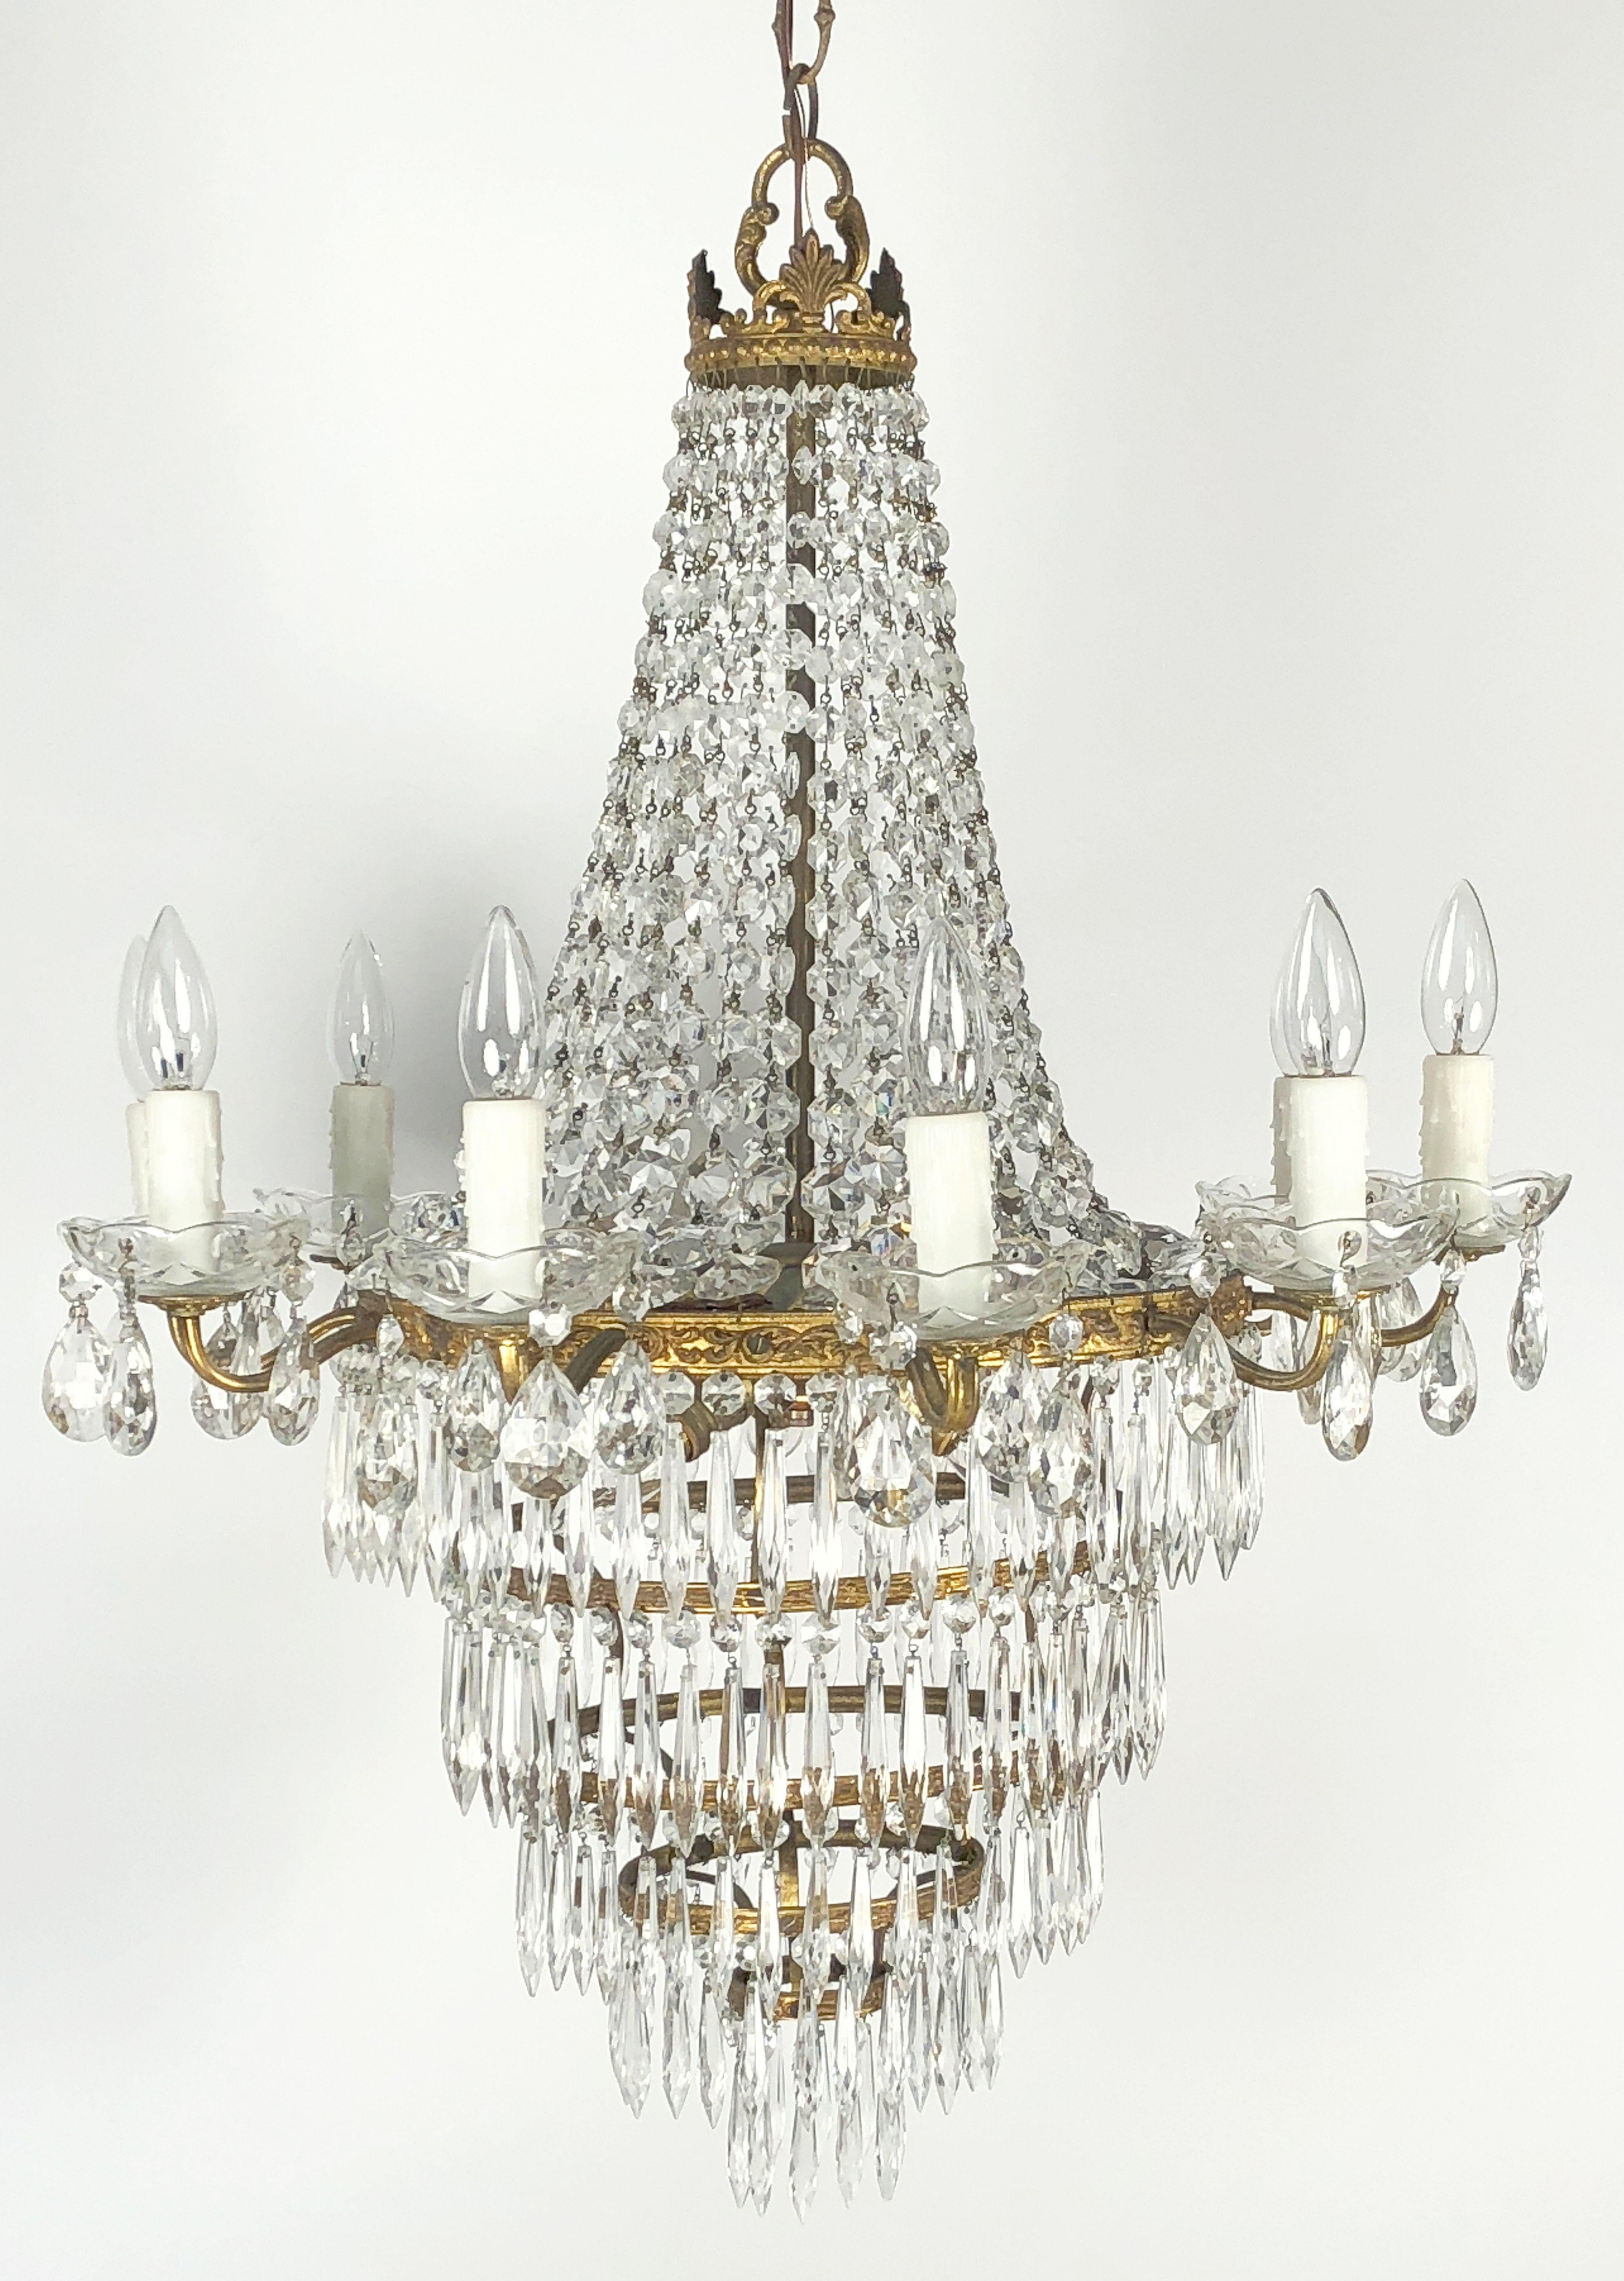 A beautiful Italian thirteen-light hanging fixture or chandelier of gilt metal and crystals, in the Empire style, featuring a crown over cascading pendants, with a ring of ten lights around the circumference surrounding a three light center, and